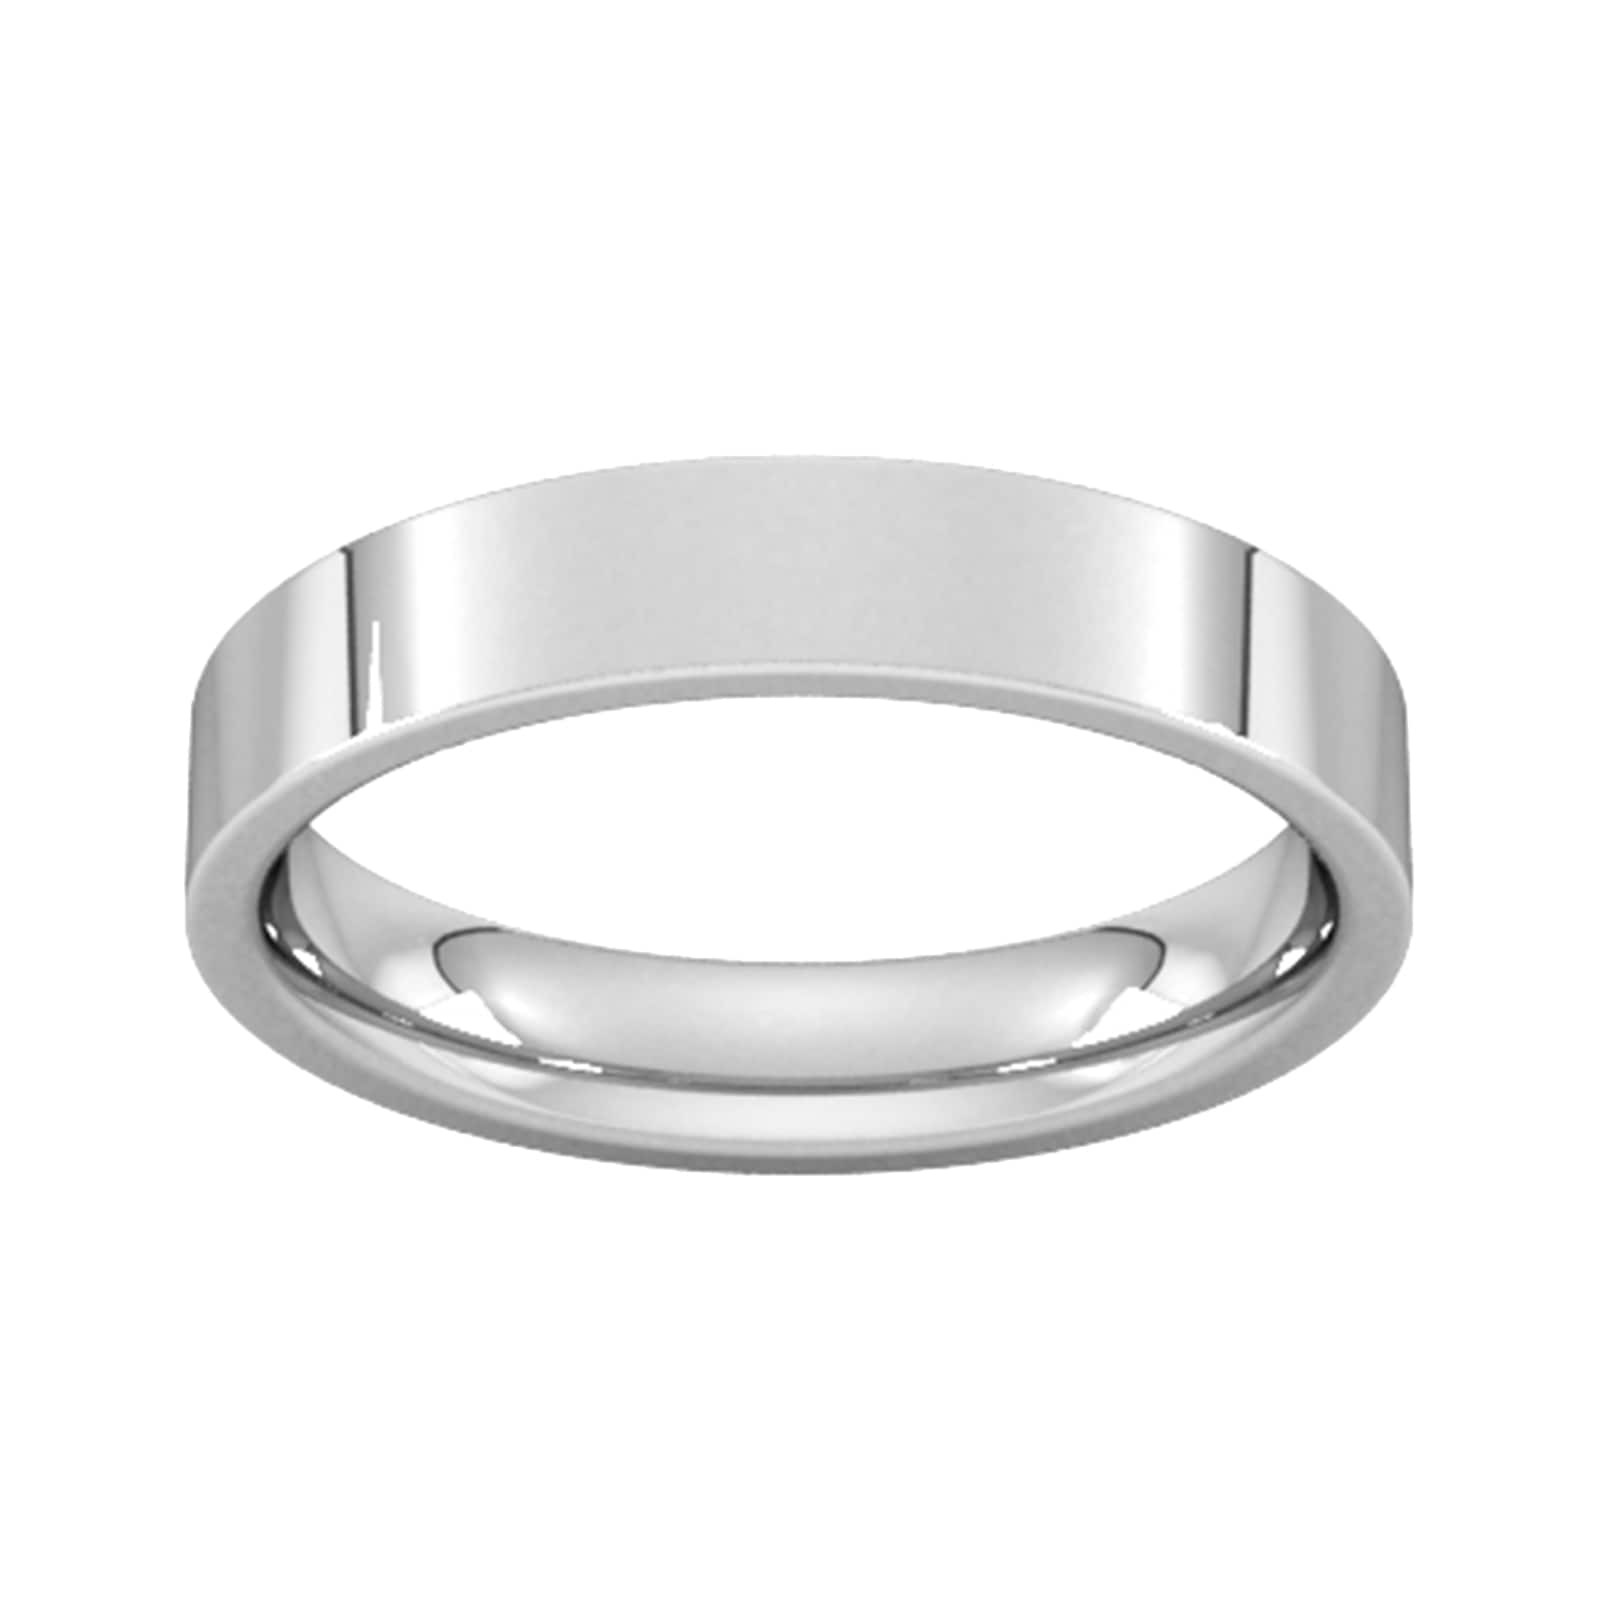 4mm Flat Court Heavy Wedding Ring In 18 Carat White Gold - Ring Size N